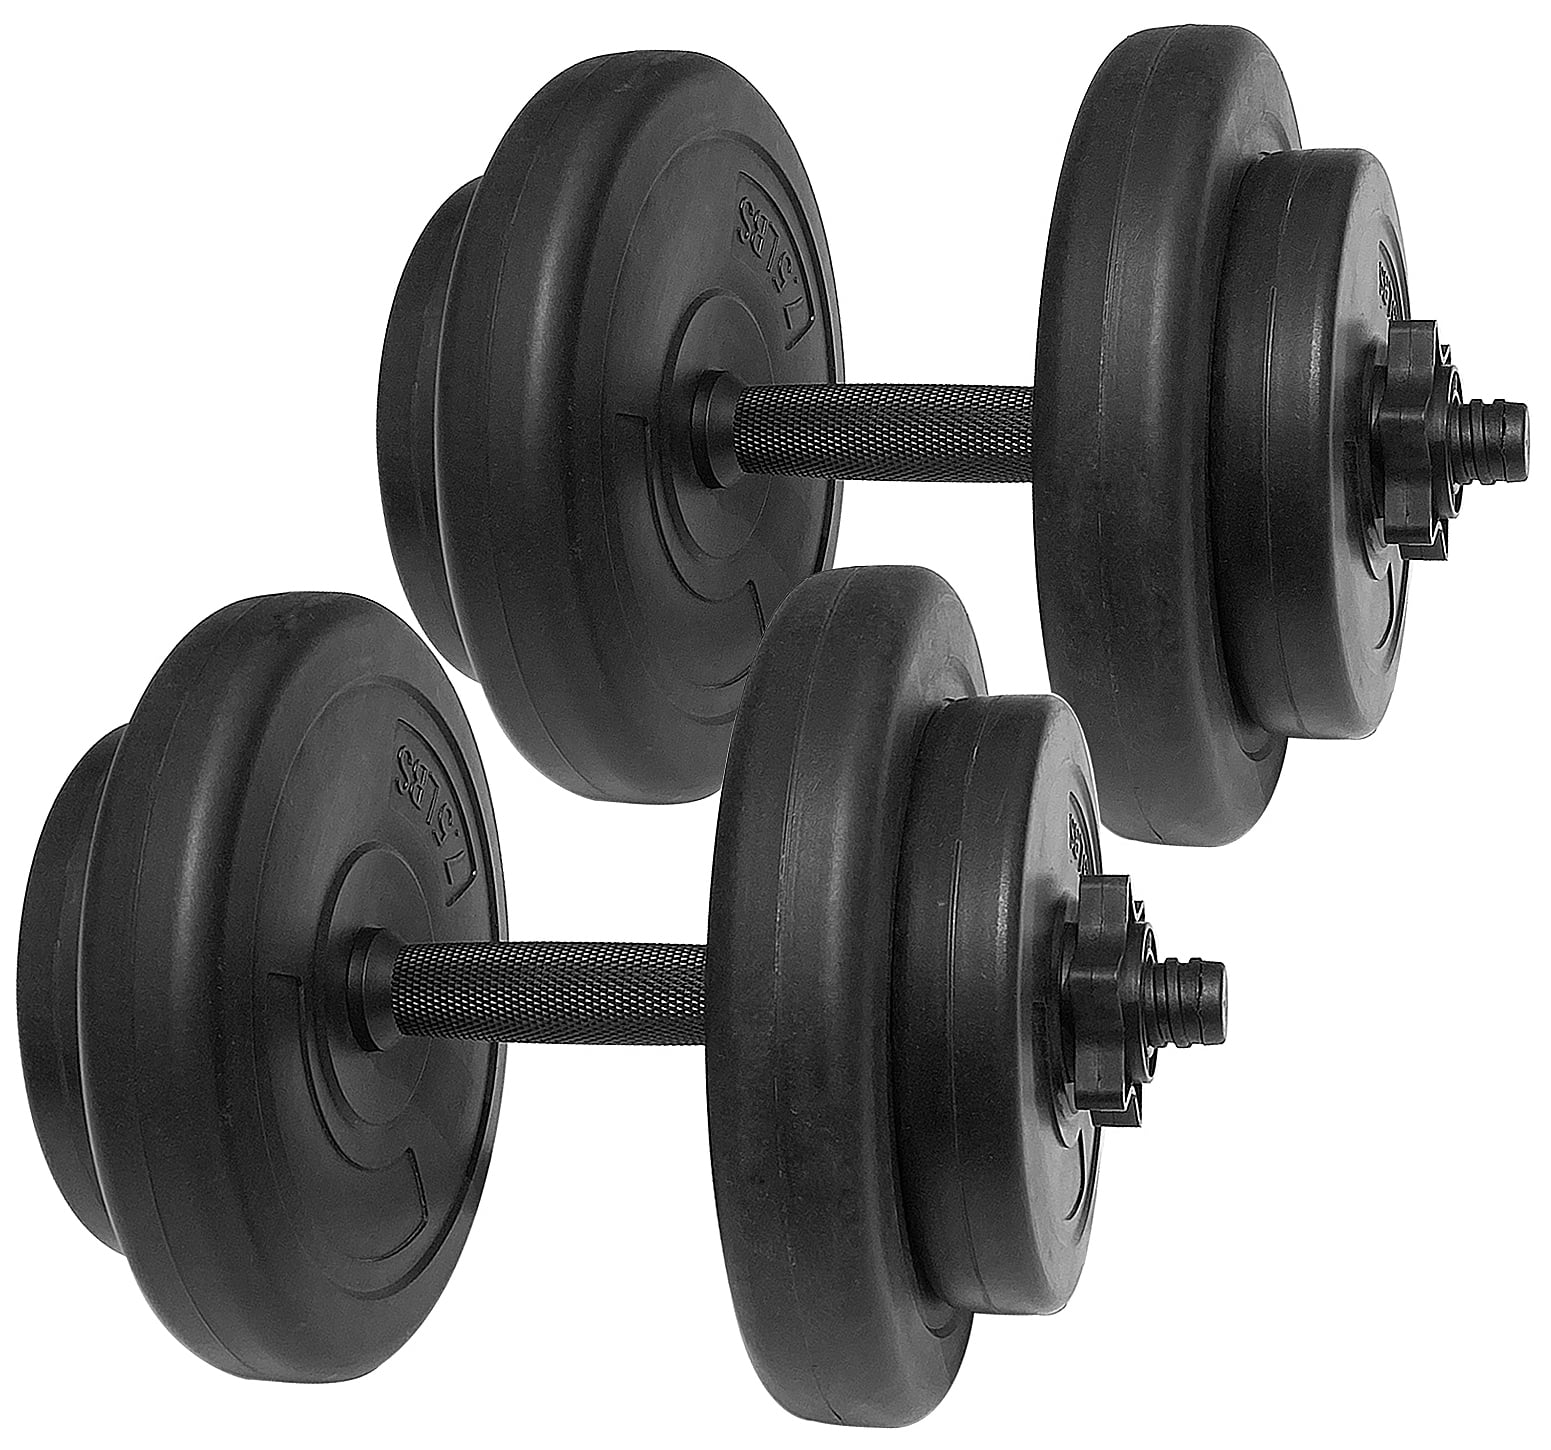 CAP Dumbbell 40 lb Adjustable Vinyl Set In Hand Ready to Ship FAST SHIPPING 